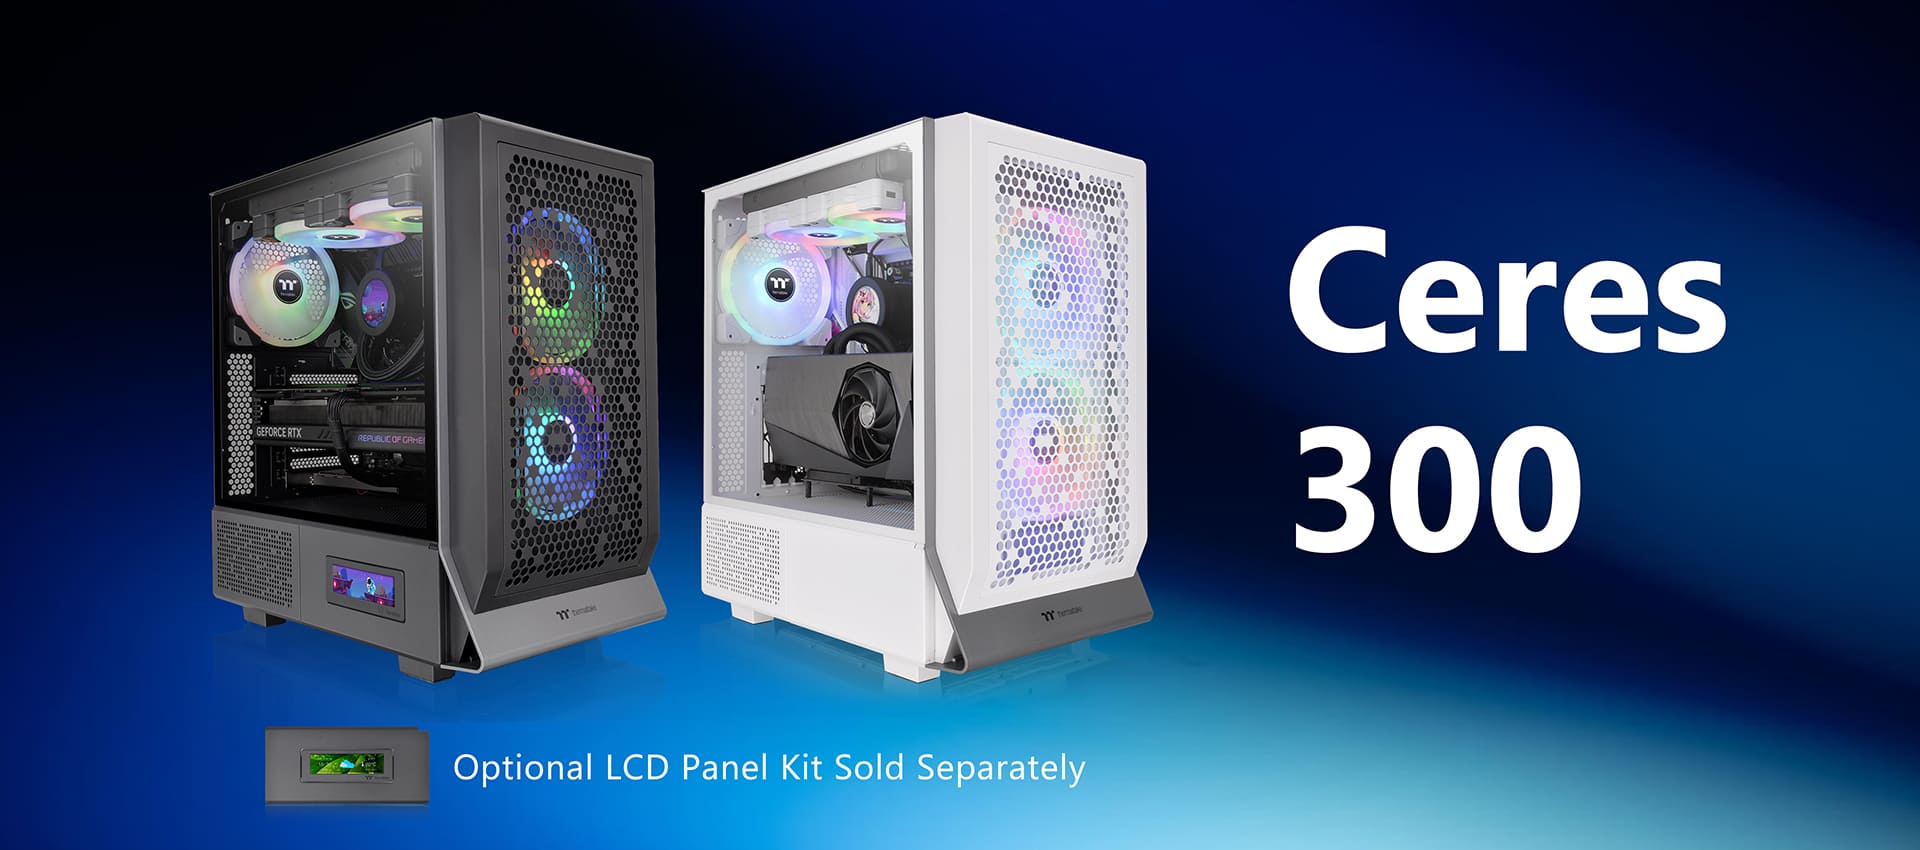 Ceres 300 TG ARGB Mid Tower Chassis